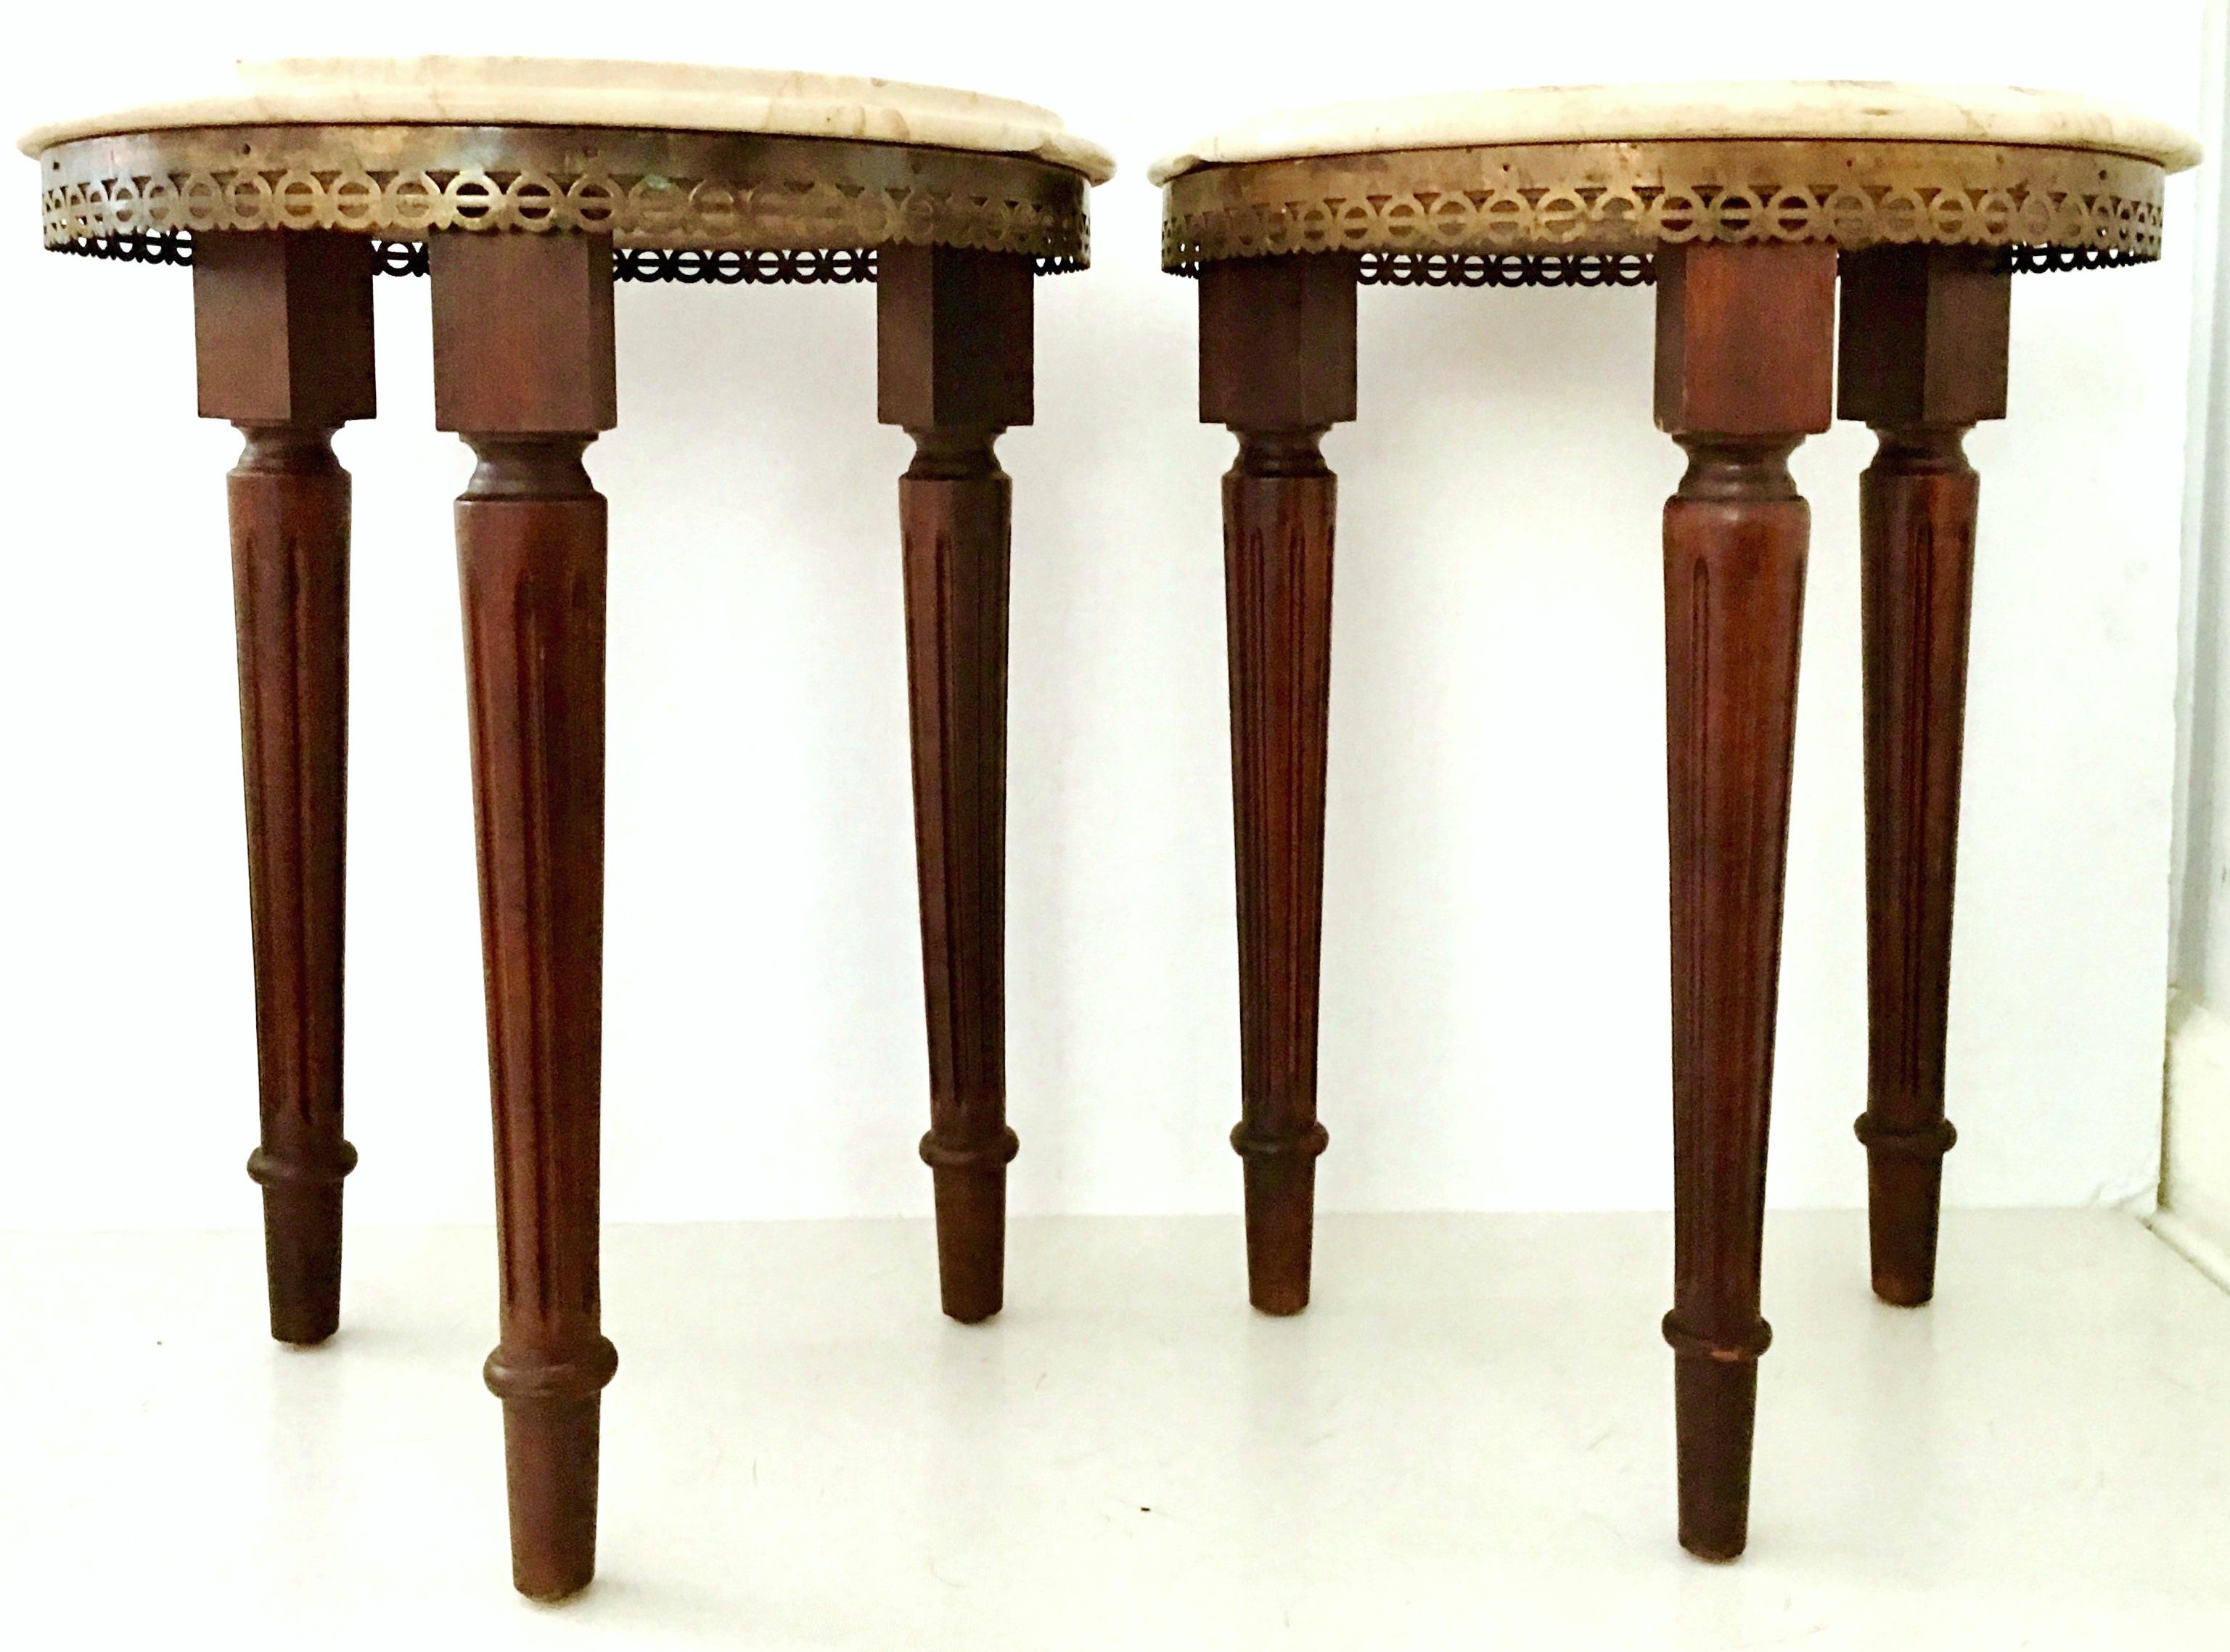 Pair Of 20th Century Signed French Louis XVI style Guerdion Mahogany and marble-top round side tables. These Classic tables feature fluted and turned legs a pierced geometric bronze gallery and beveled polished marble top in crema marfil. Signed on